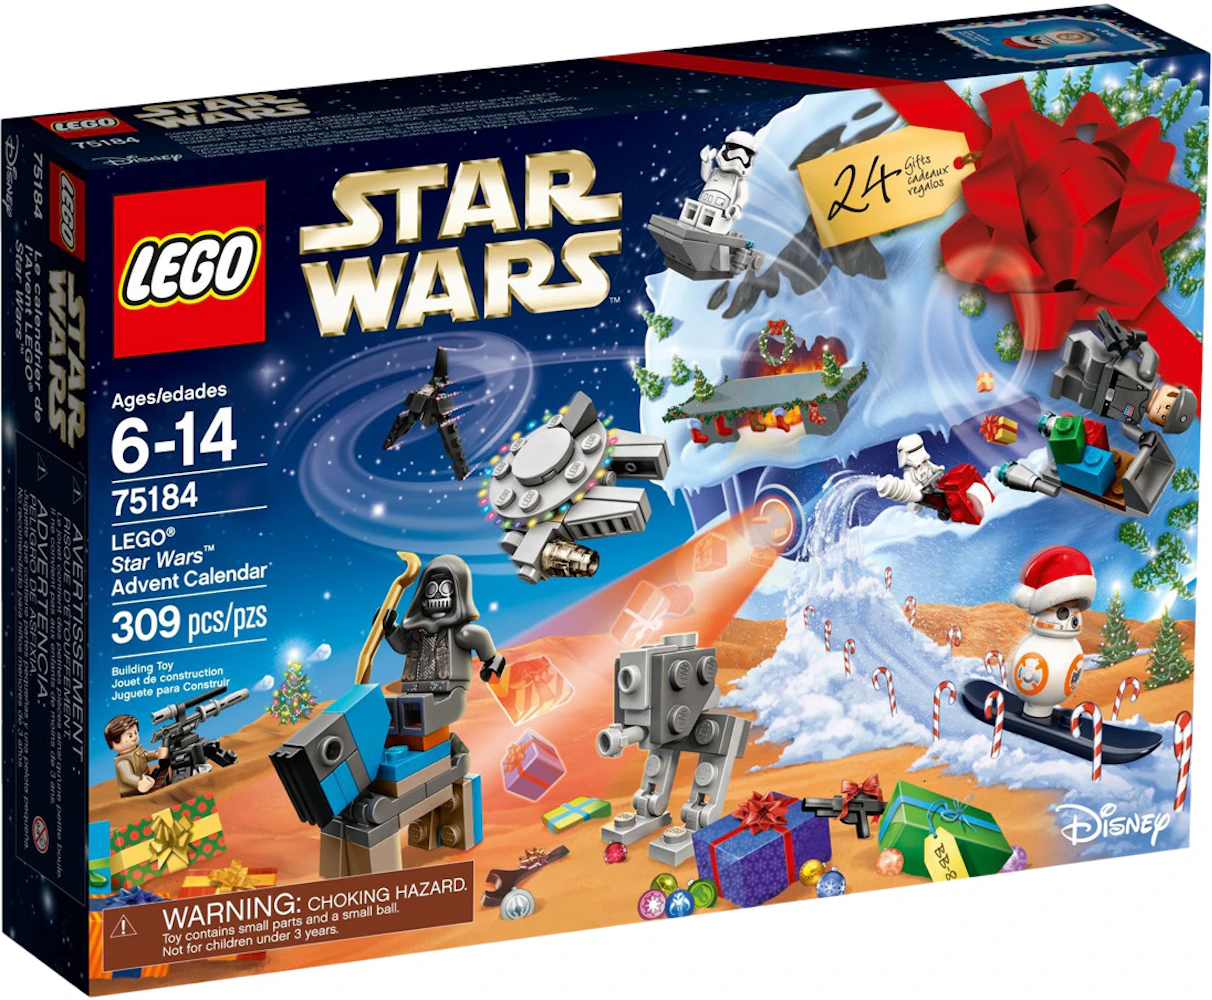 Preview of Upcoming LEGO 'Star Wars' Advent Calendar Includes